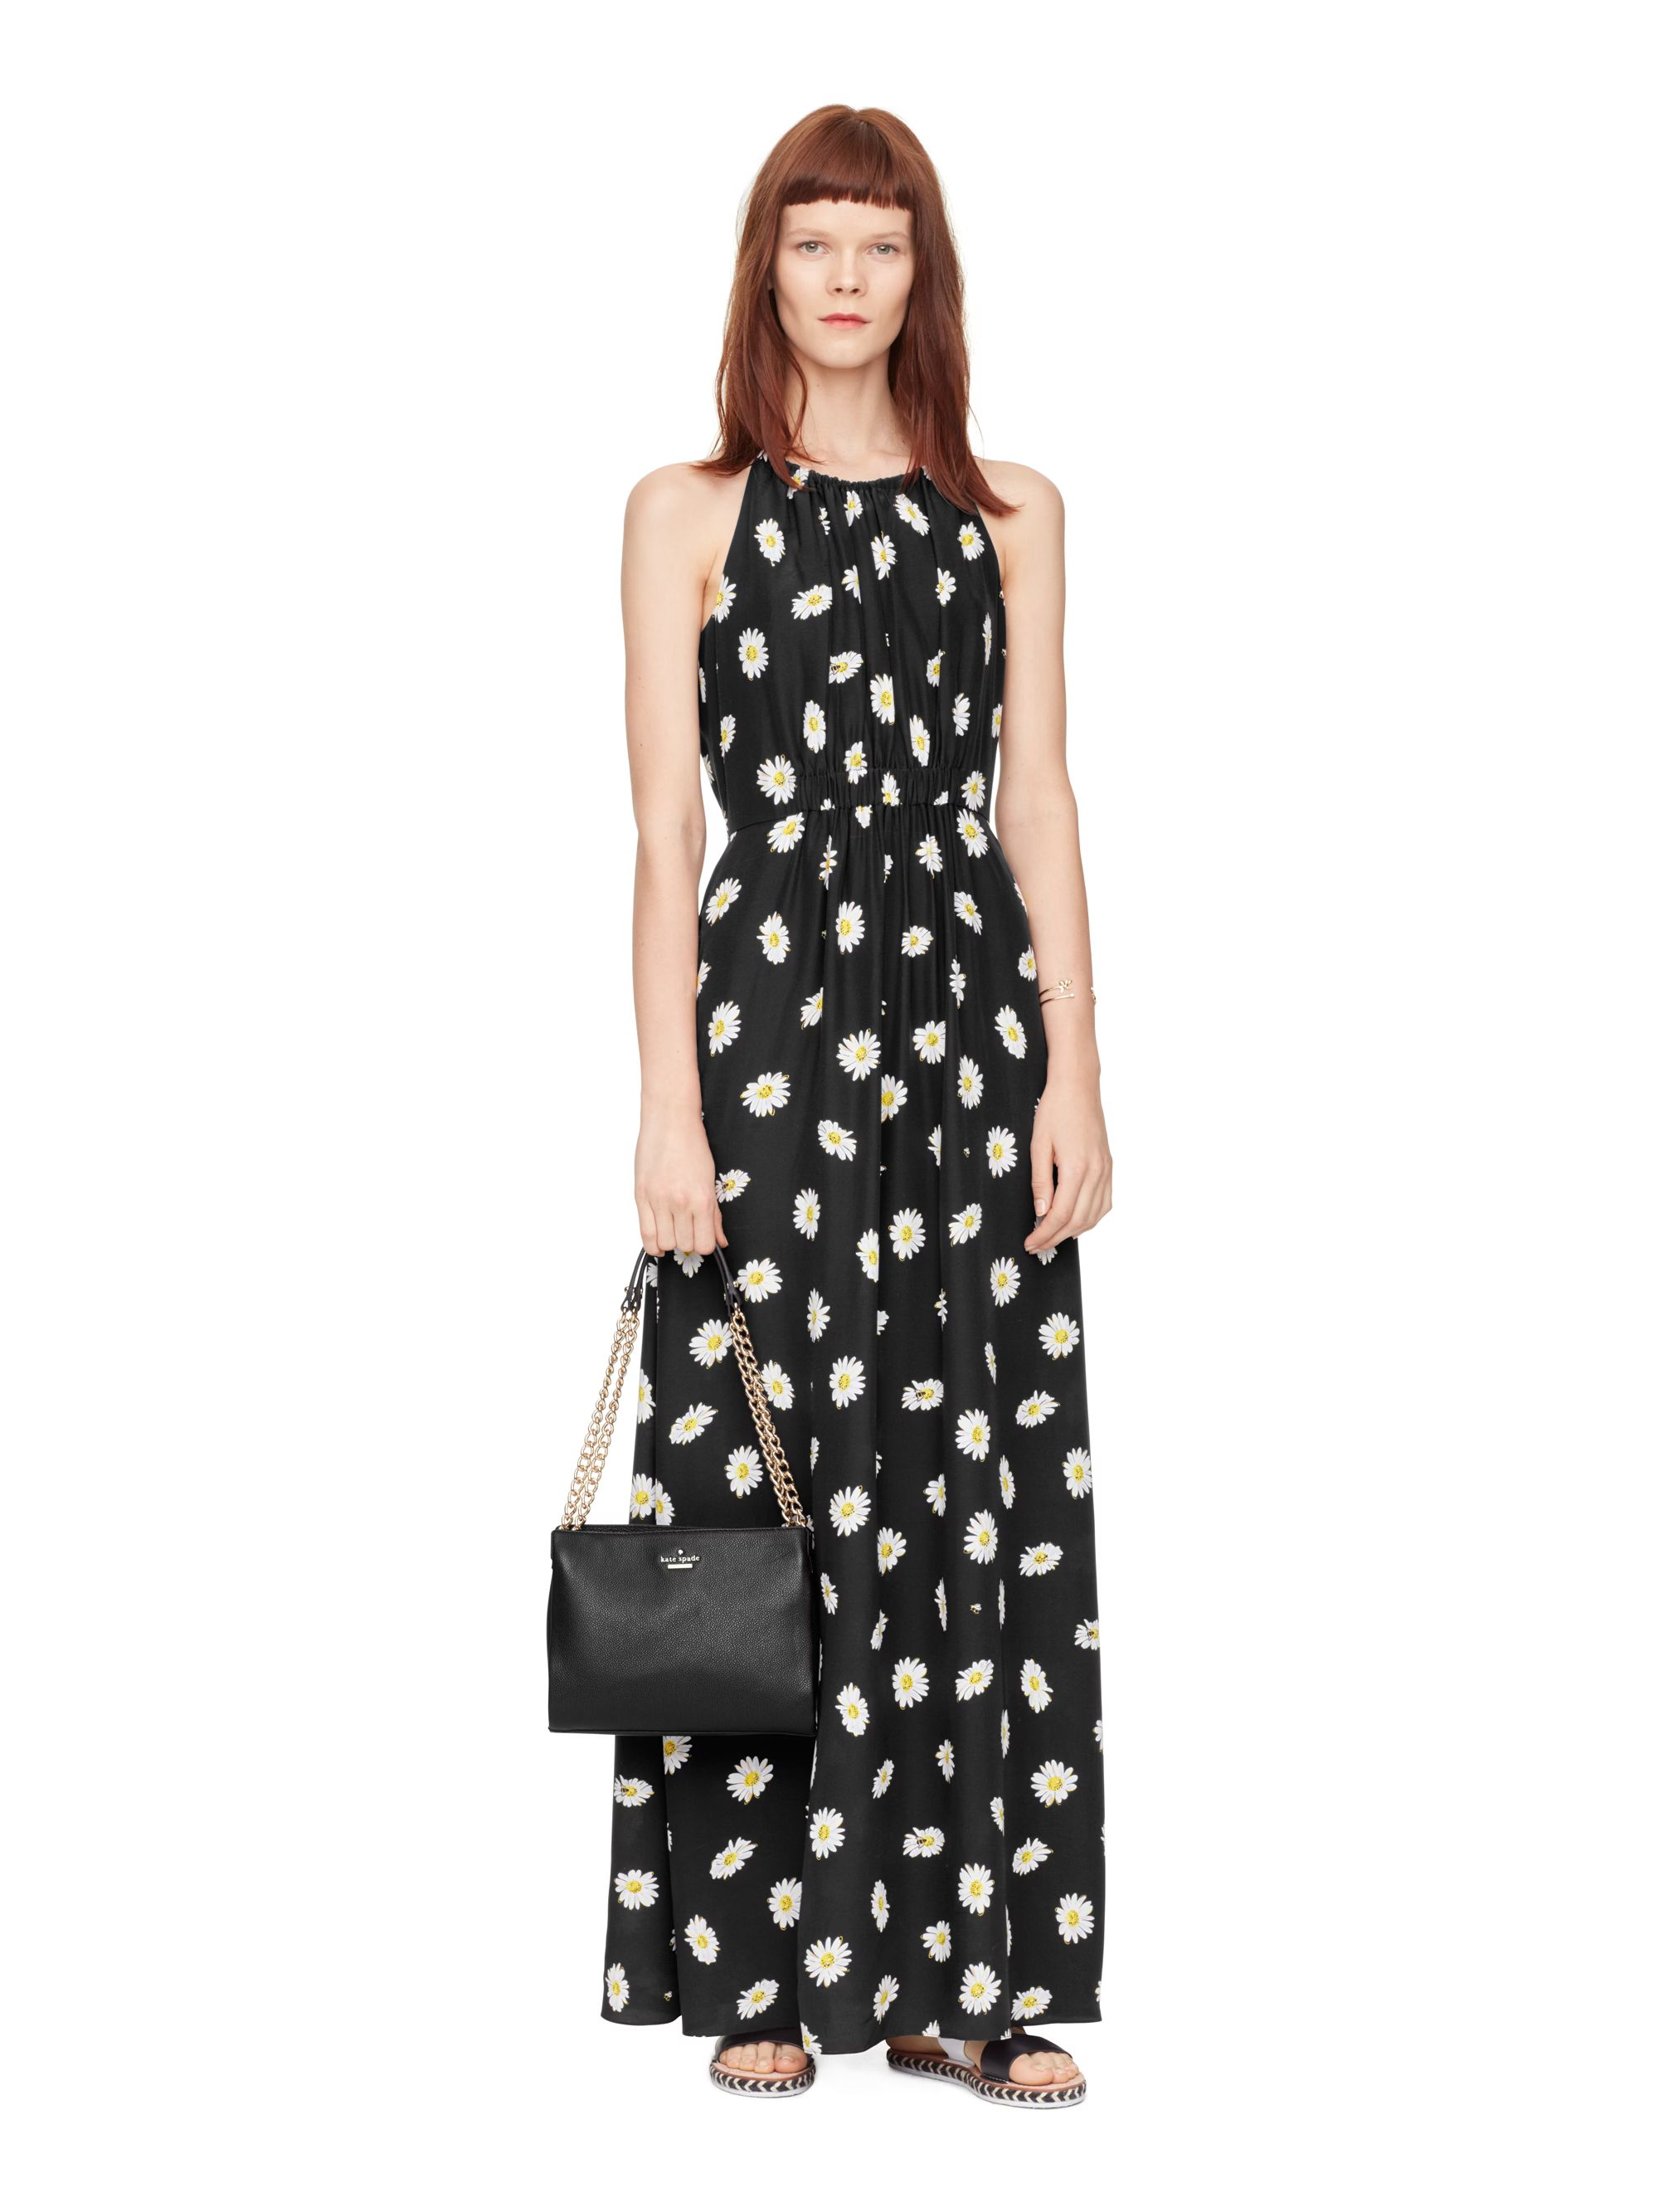 daisy dot maxi dress this item is30% offwhat a steal!/* rendered styles .bx-campaign-283204 */.bxc.b | Kate Spade US